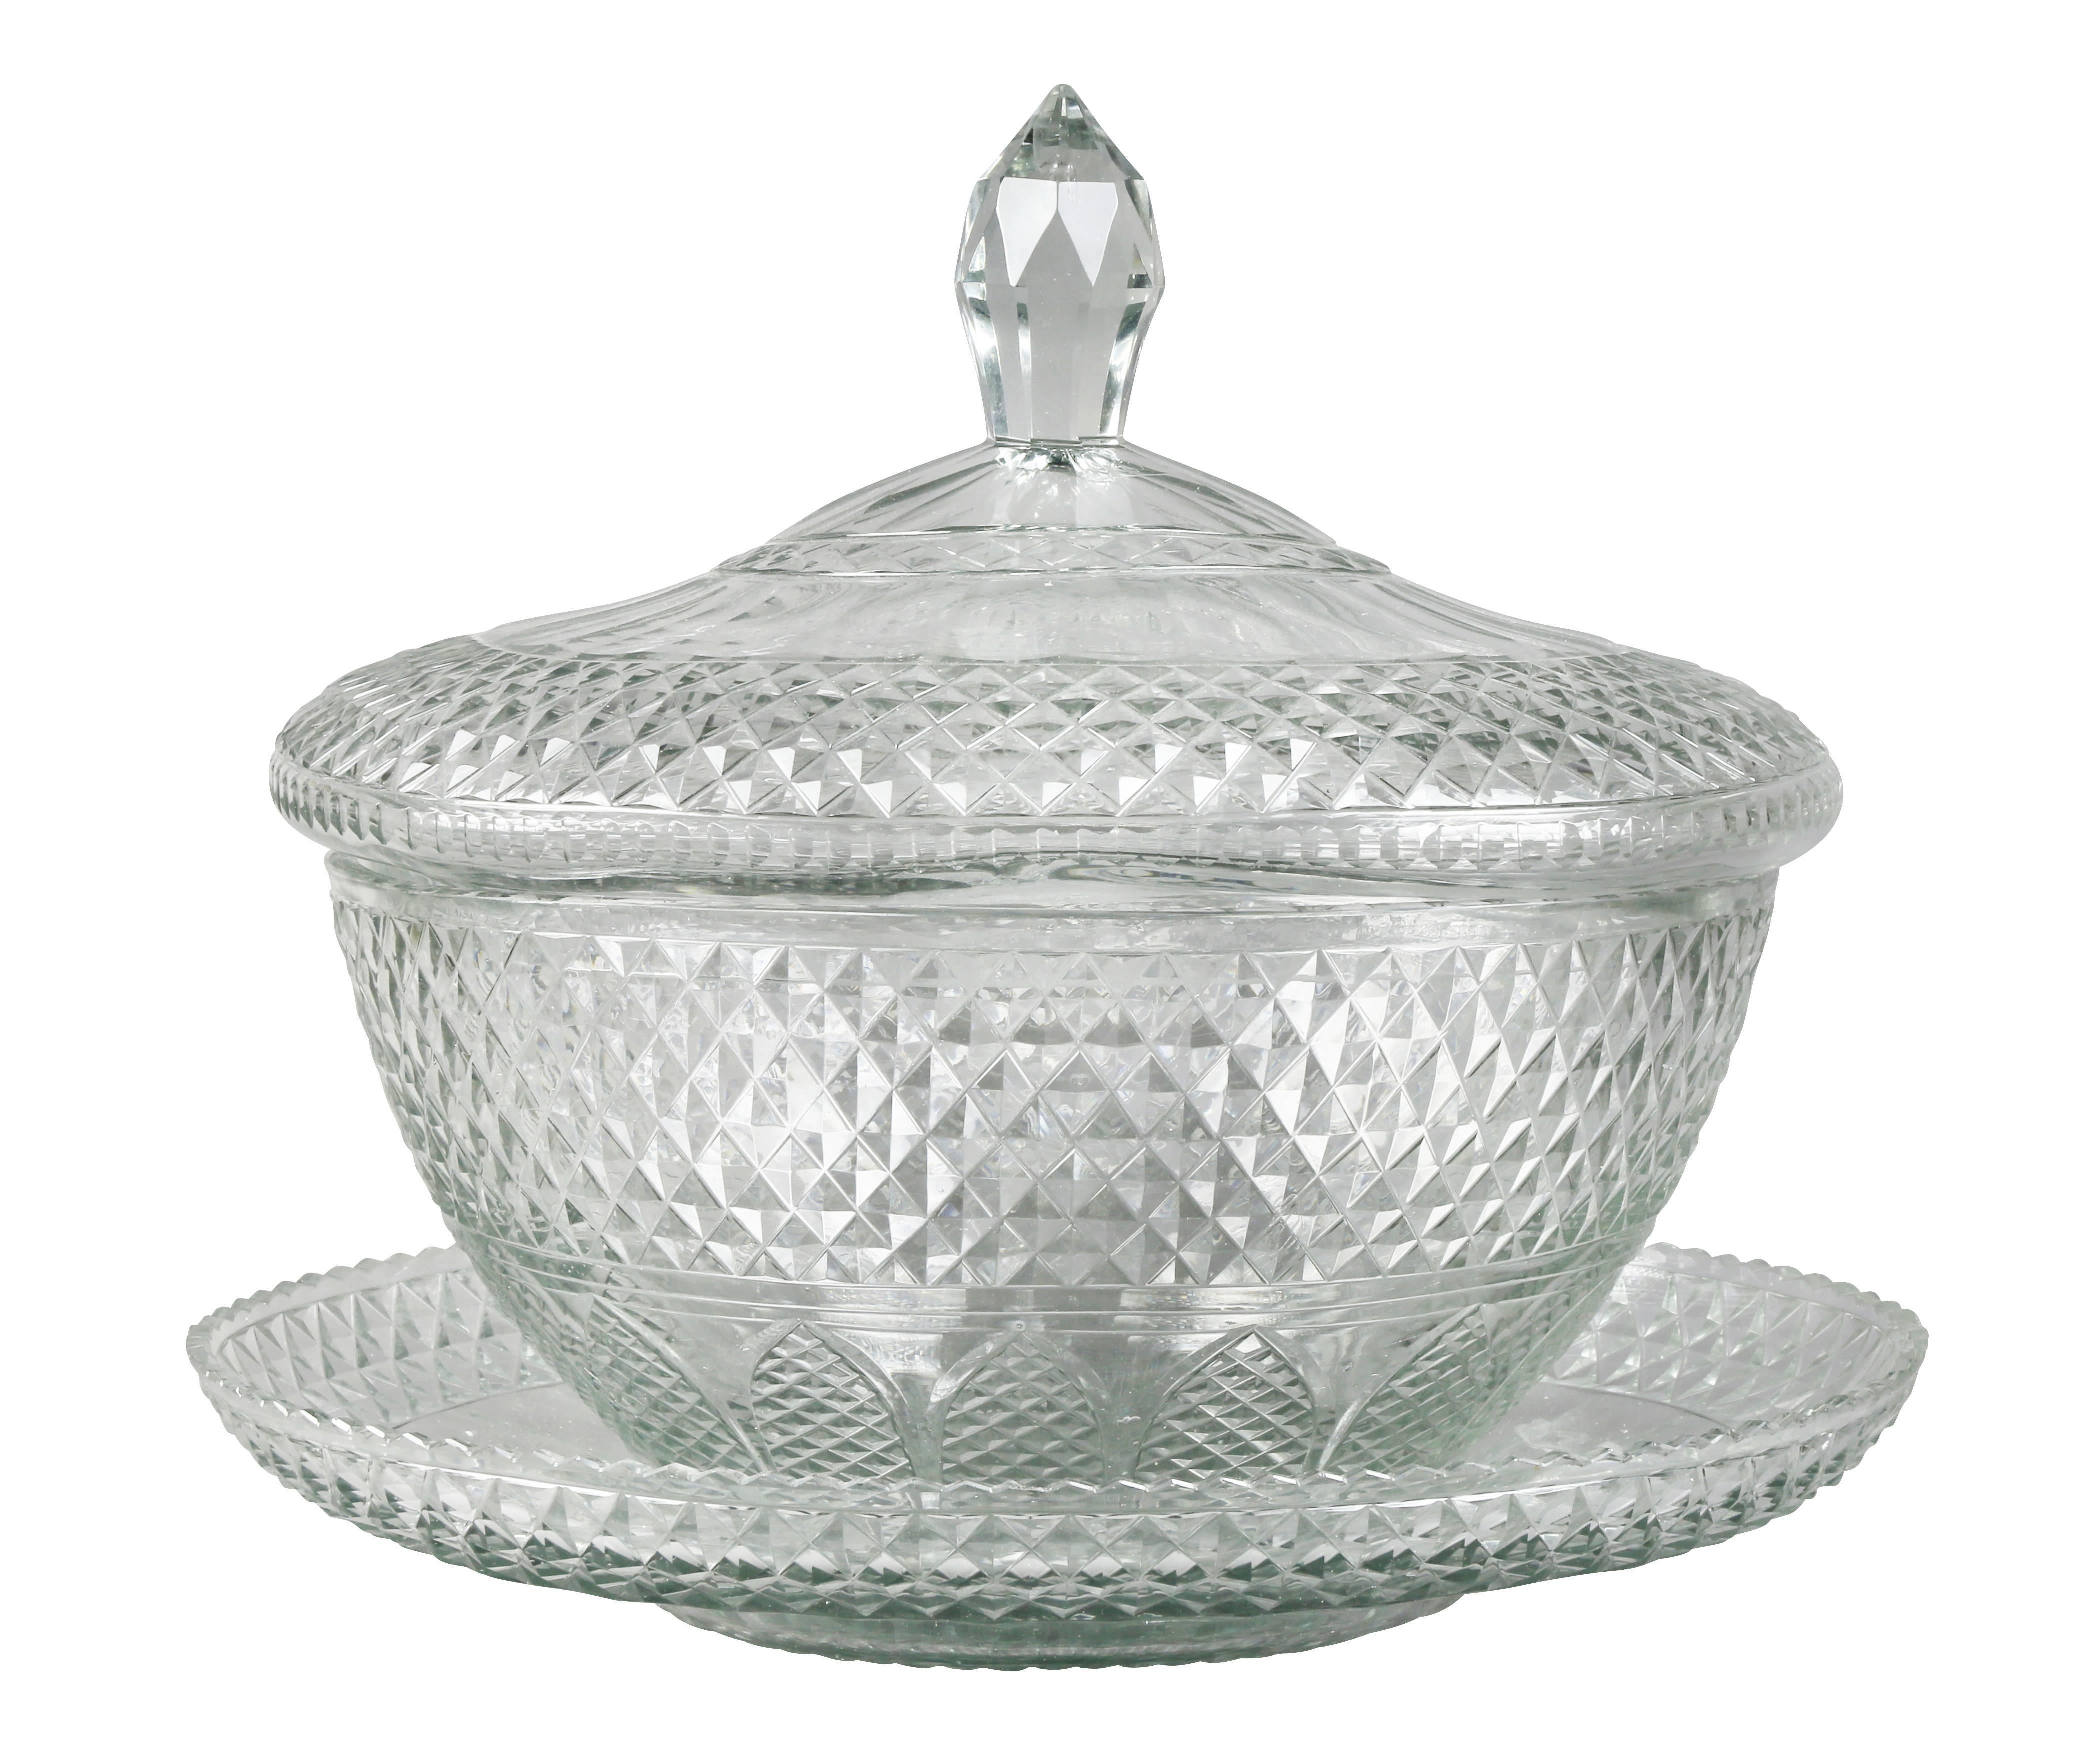 With domed cover with cut diamond cut finial, bowl section with conforming diamond cut and matching underplate. Flaws in making.